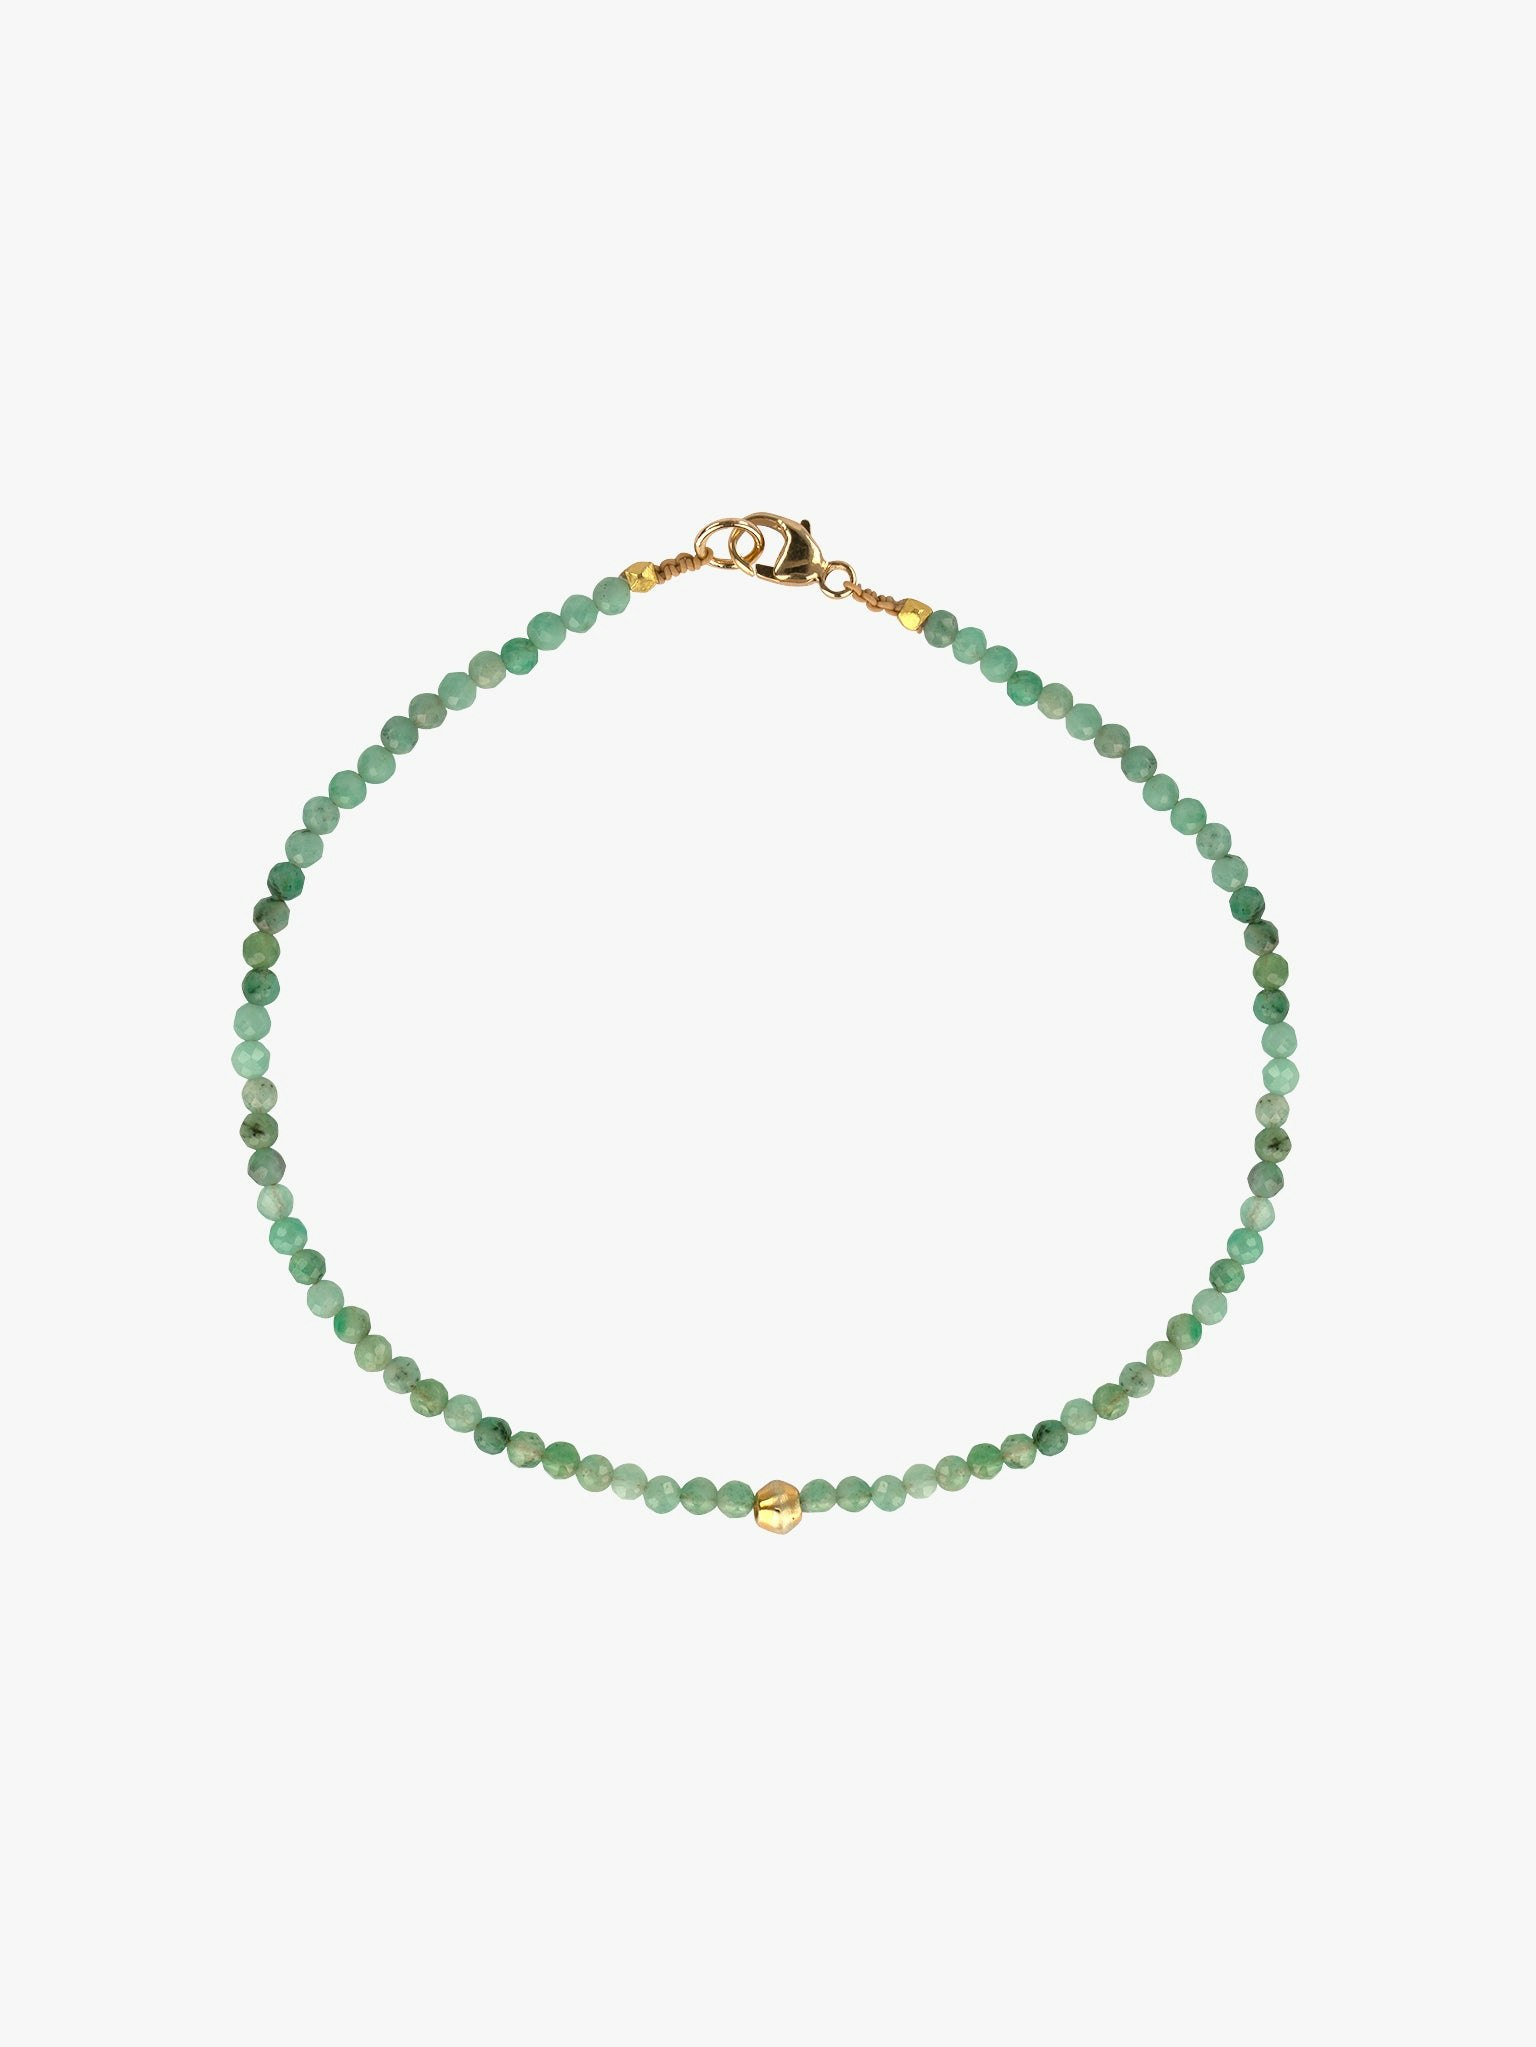 Emerald and gold beaded bracelet video